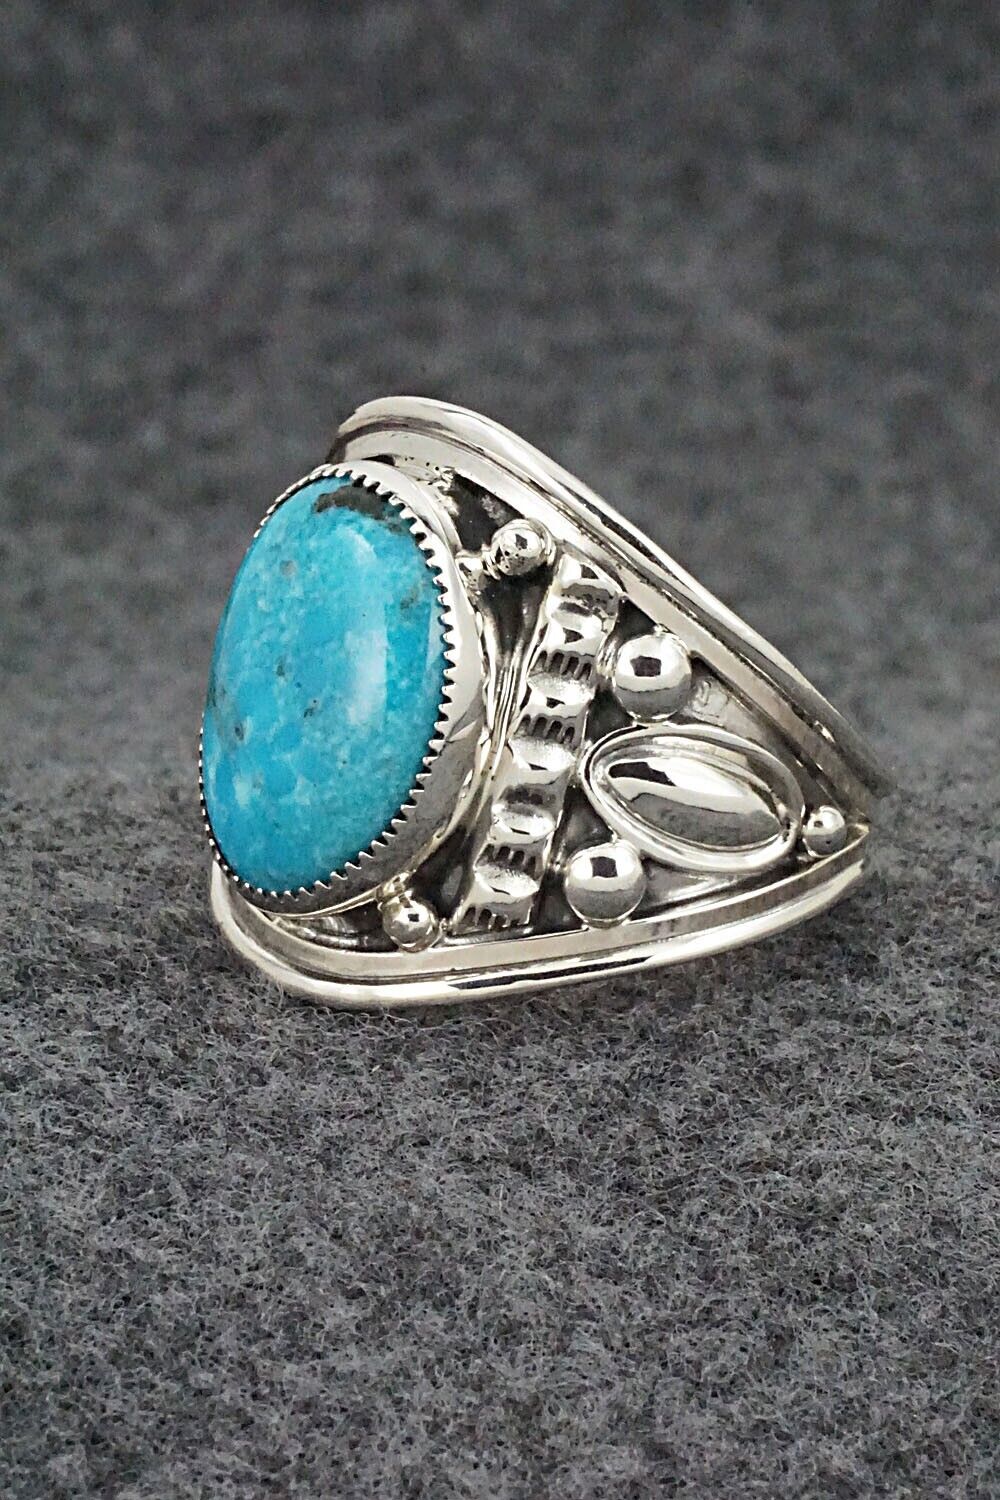 Turquoise and Sterling Silver Ring - Larson Lee - Size 13